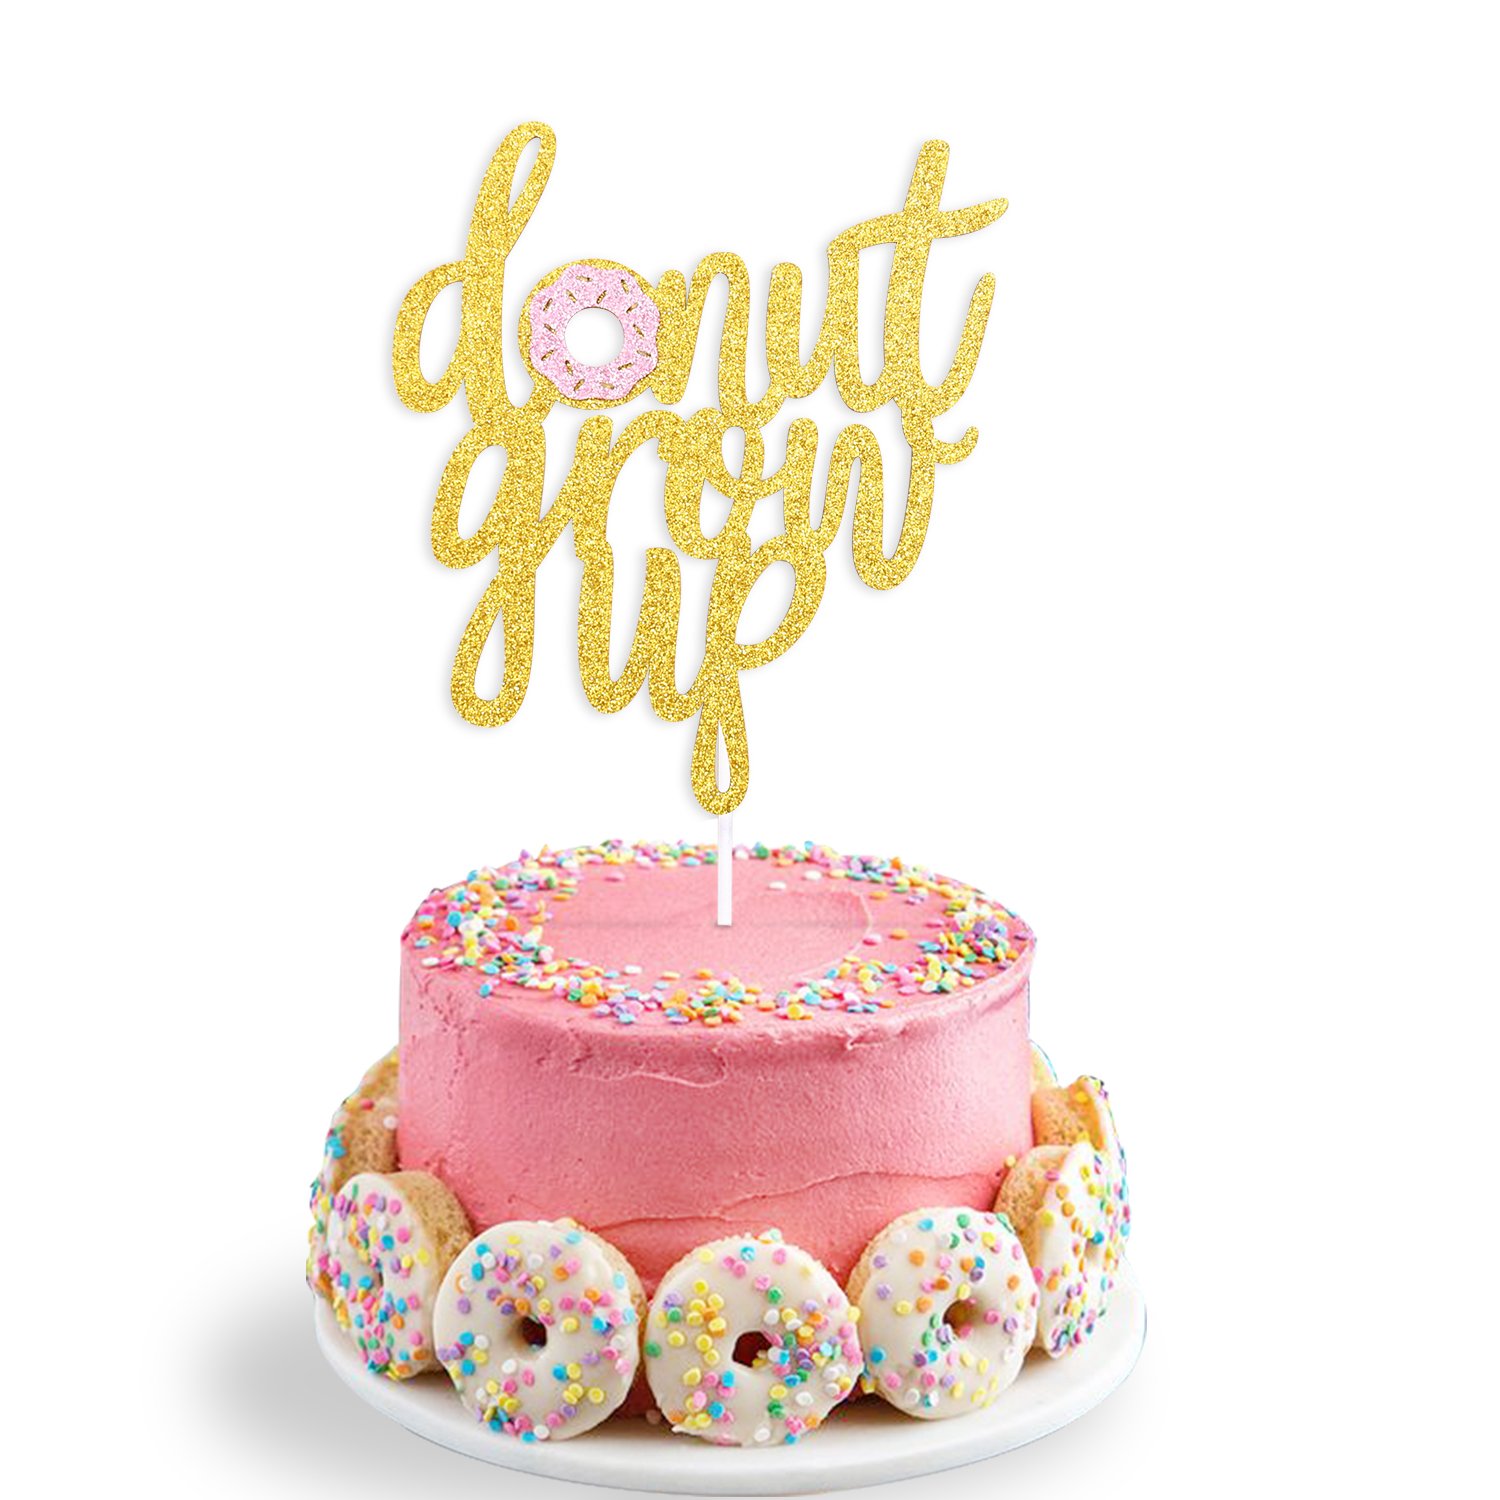 Book Cover Double Sided Glitter Donut Grow Up Cake Topper Kids Birthday Party Decoration Supplies